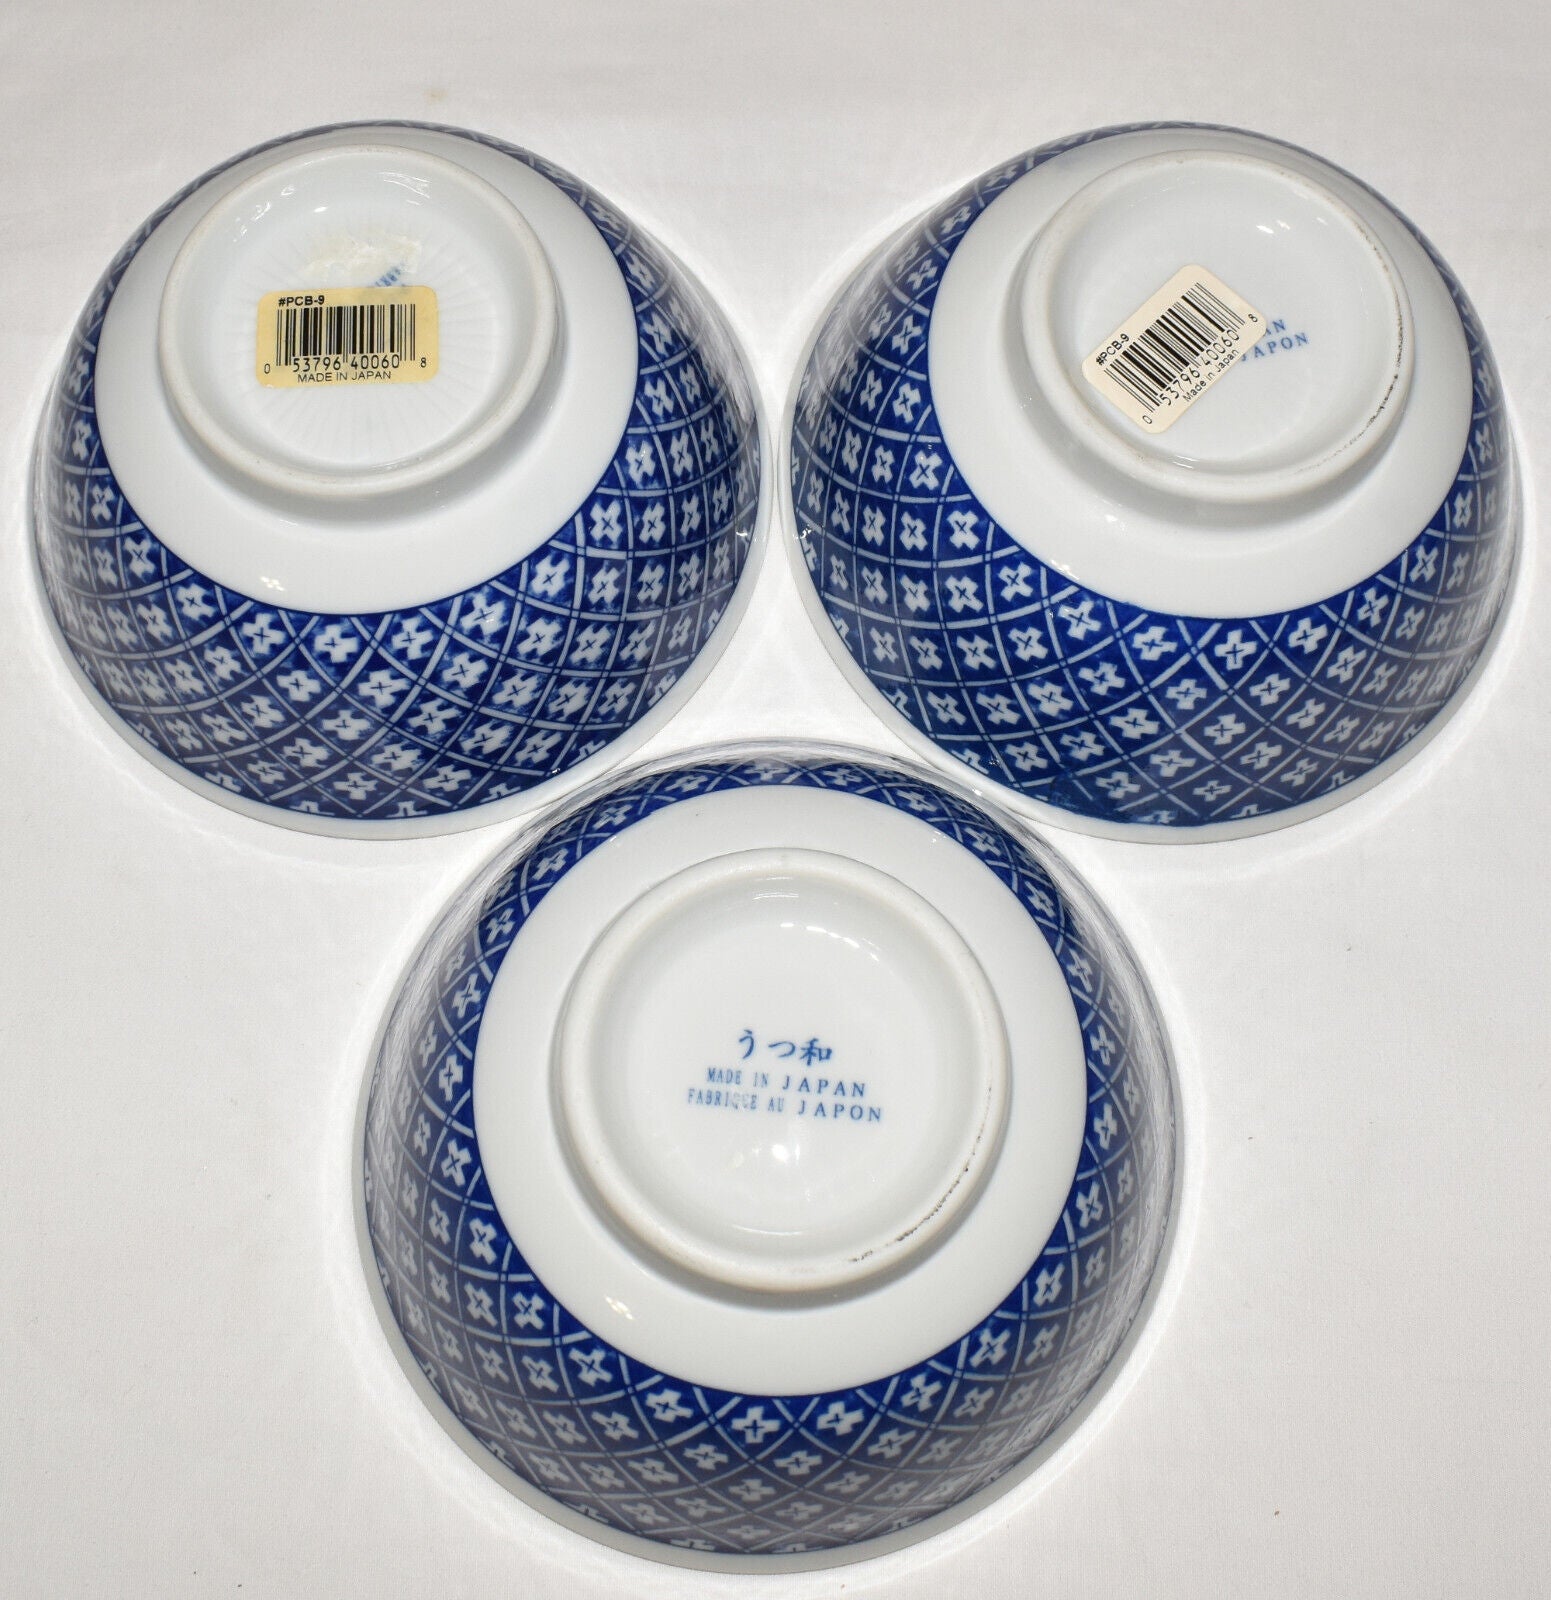 Intricate Blue and White Vine Motif Japanese Cereal Bowl Set for Six